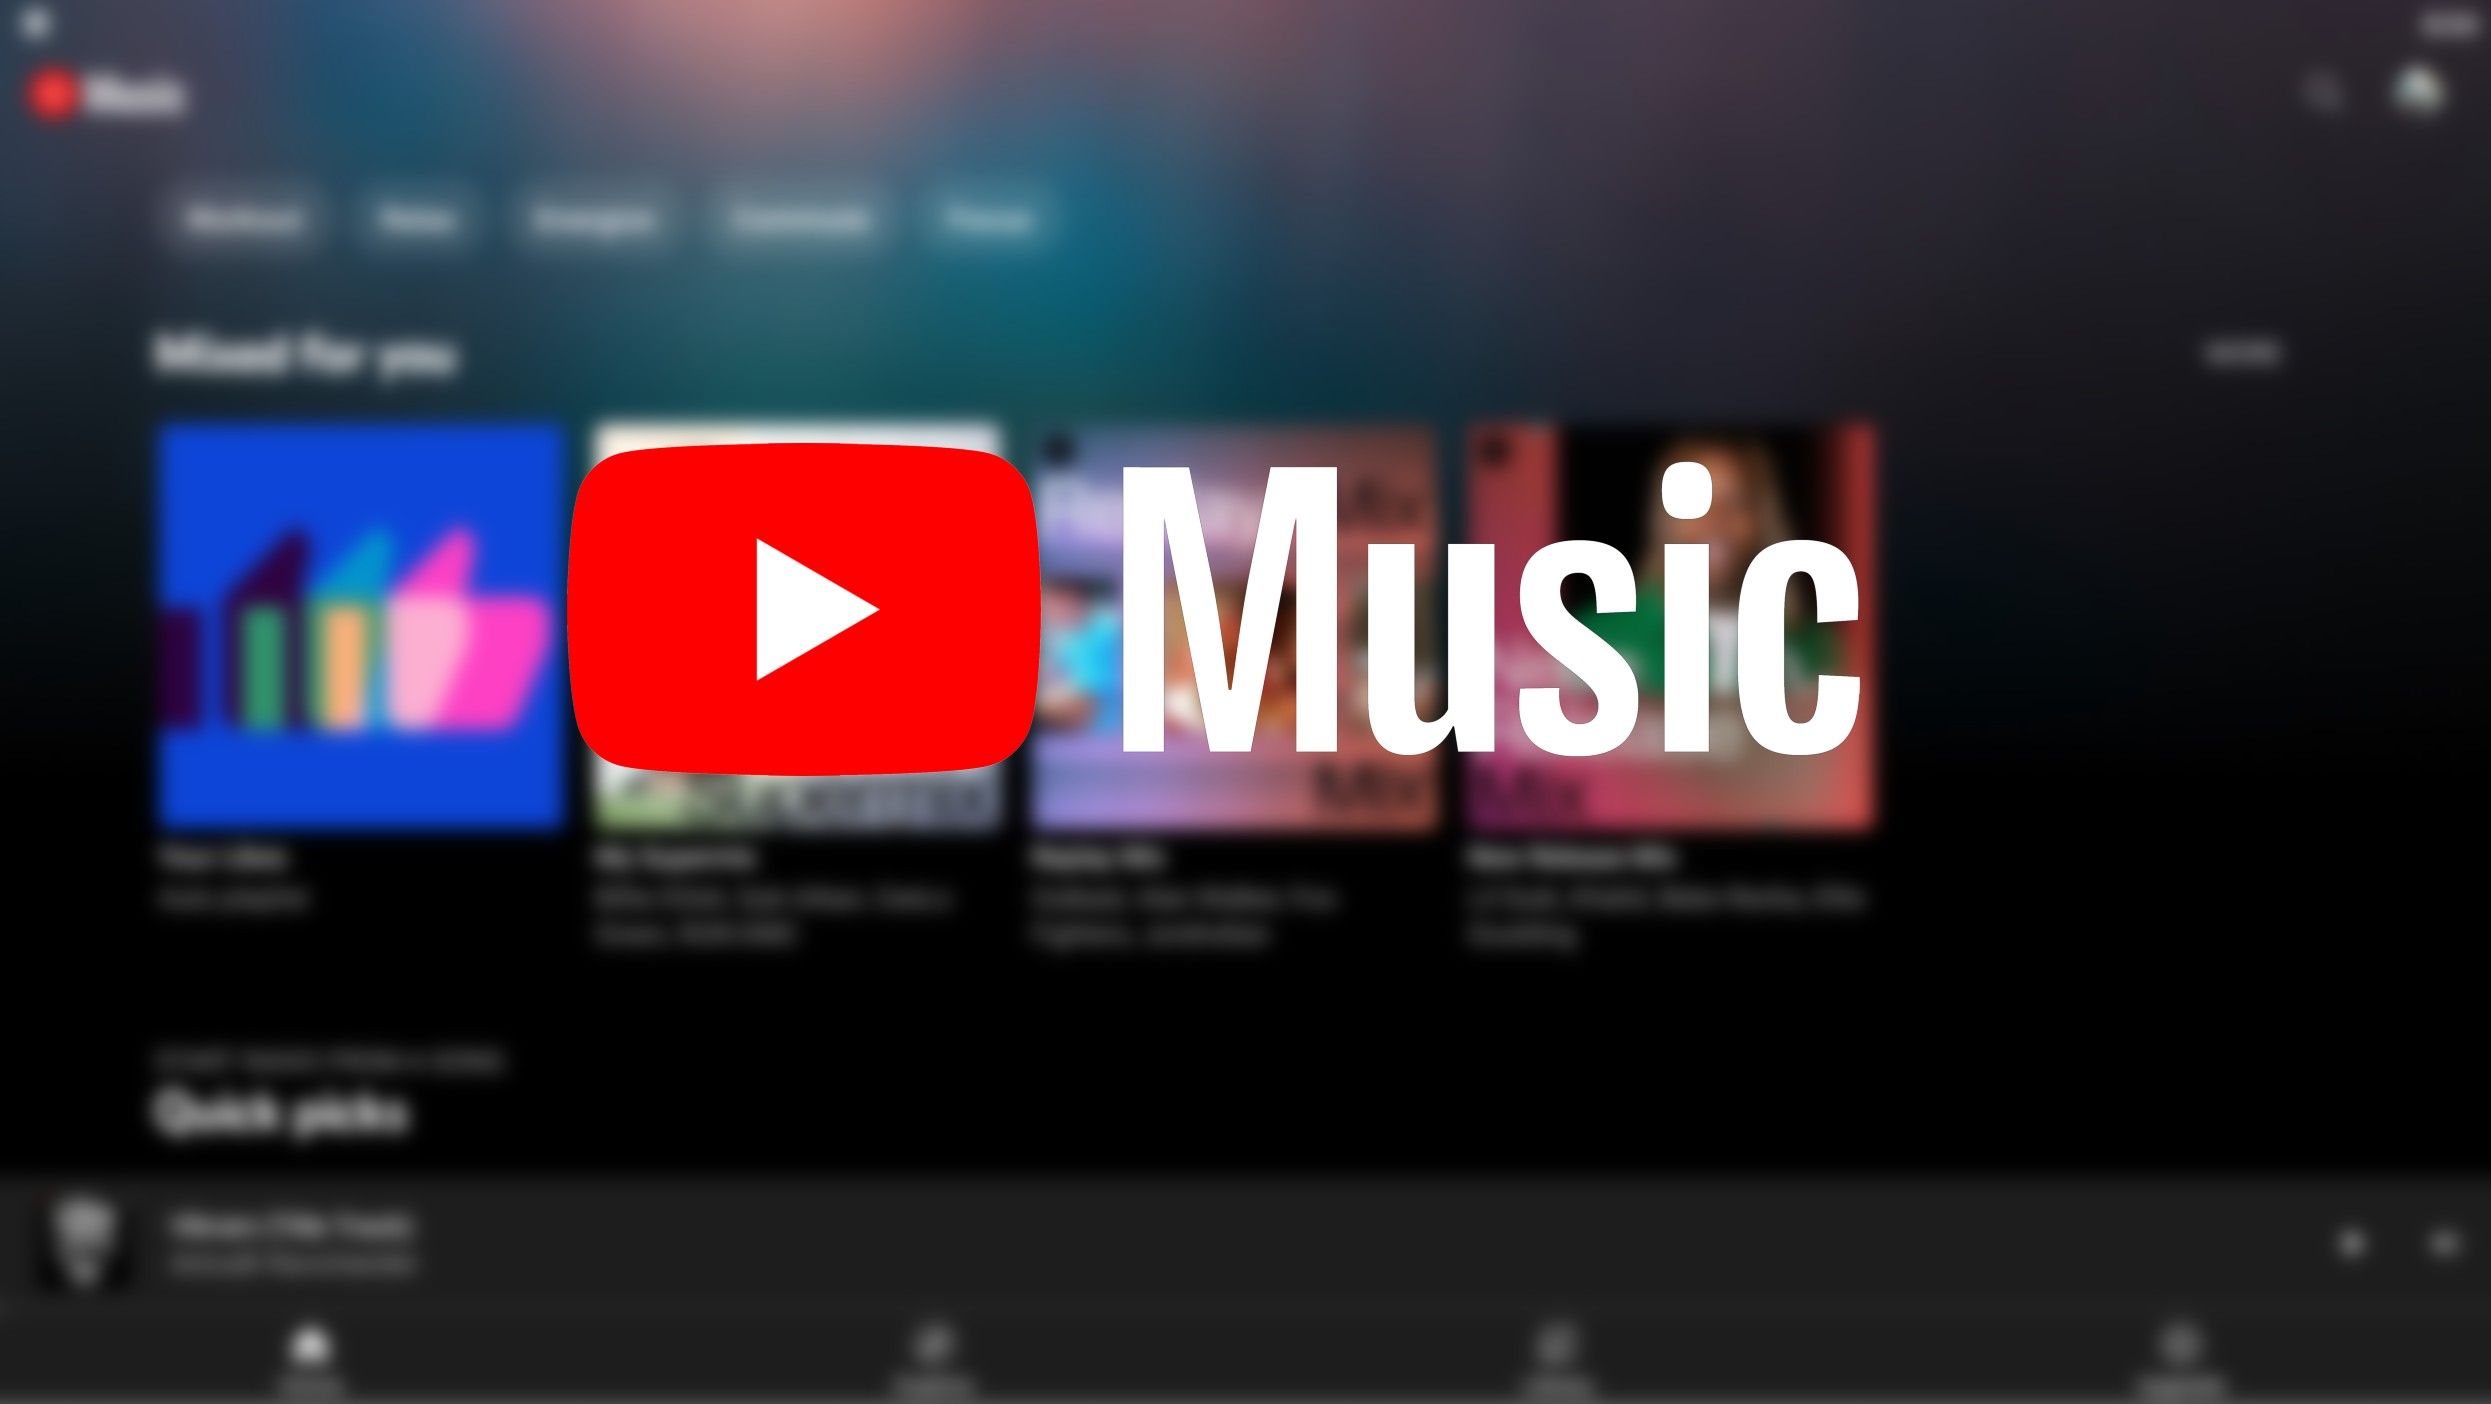 The YouTube Music logo against a blurred image of the YouTube app